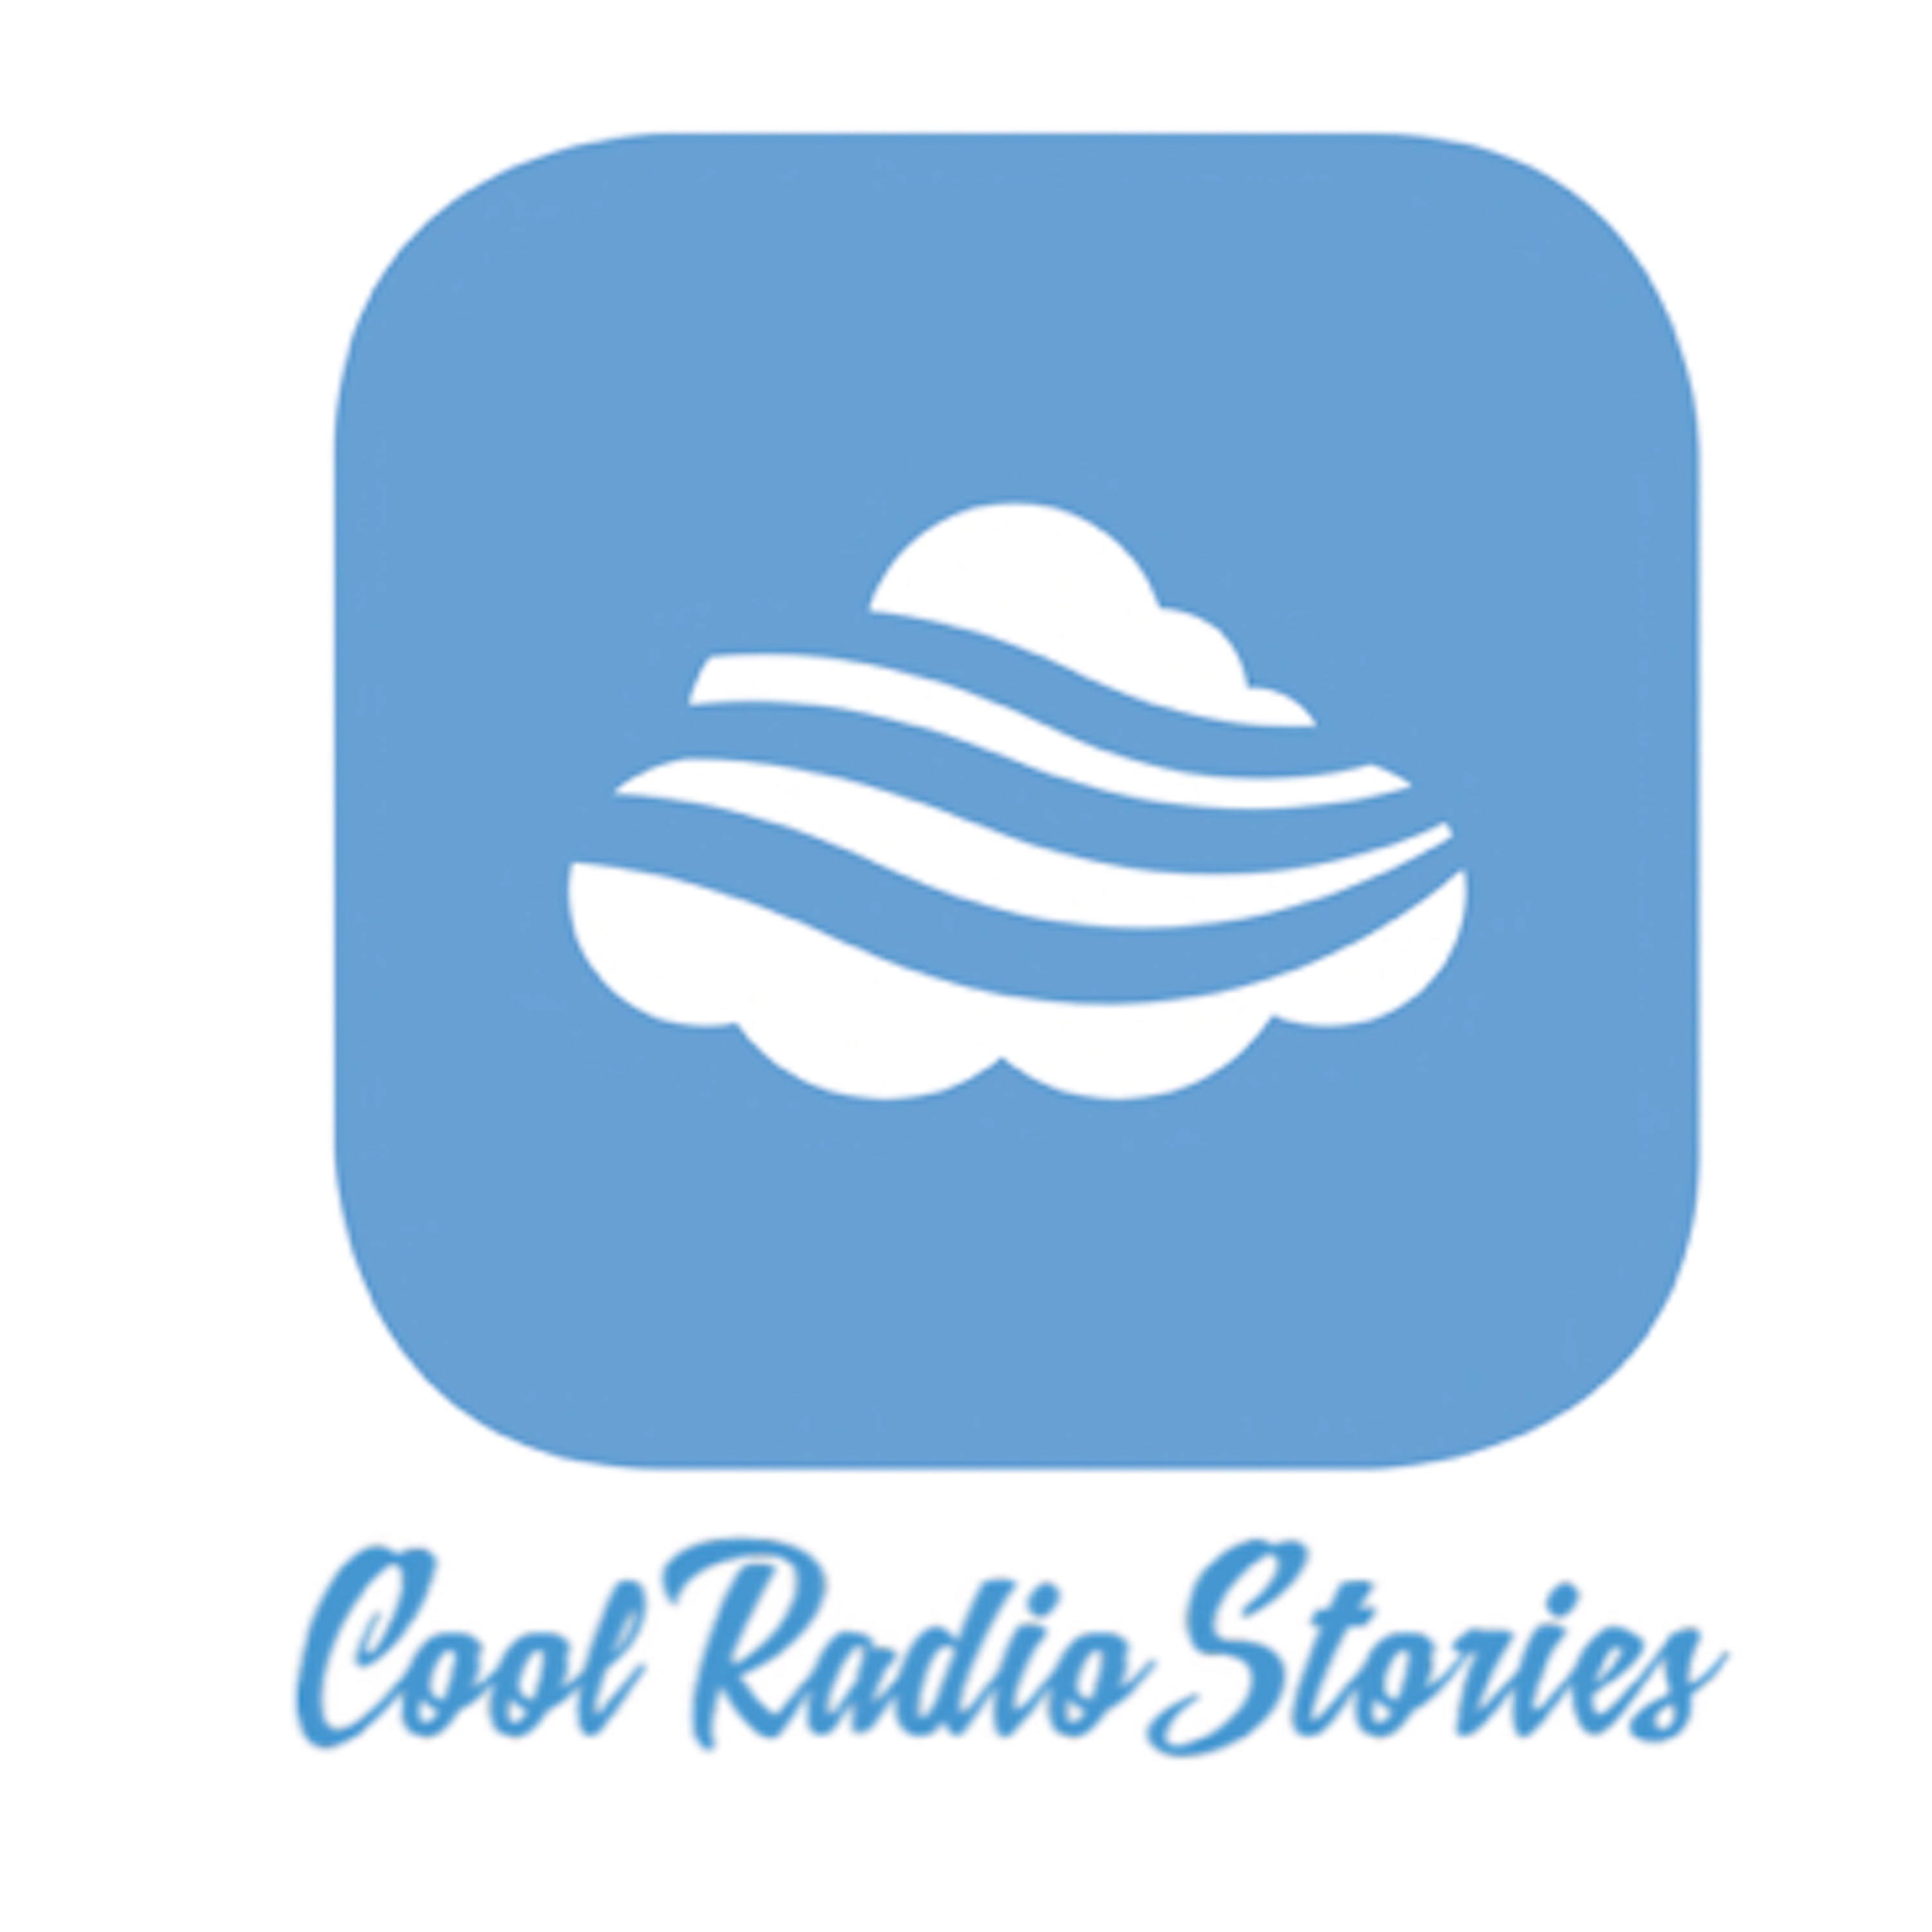 Artwork for Cool Radio Stories